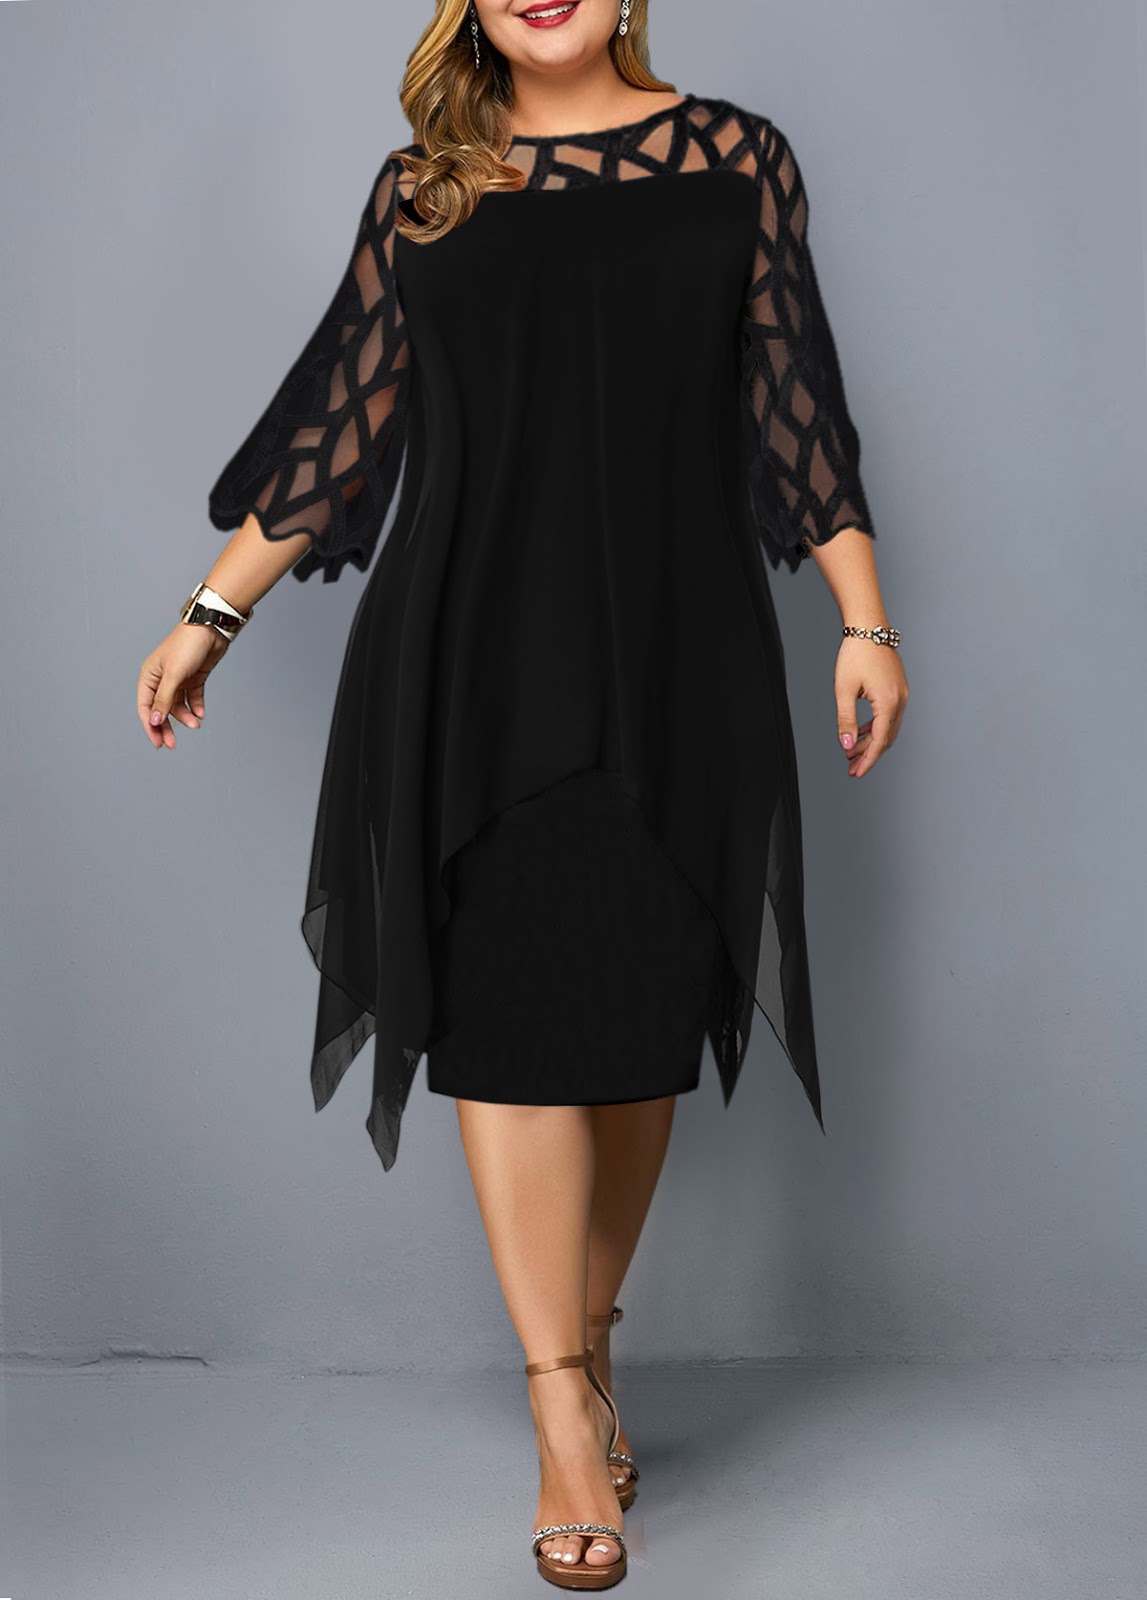 23 Best Plus Size Occasion Dresses From Rotita-2019-2020 Plus Size ...